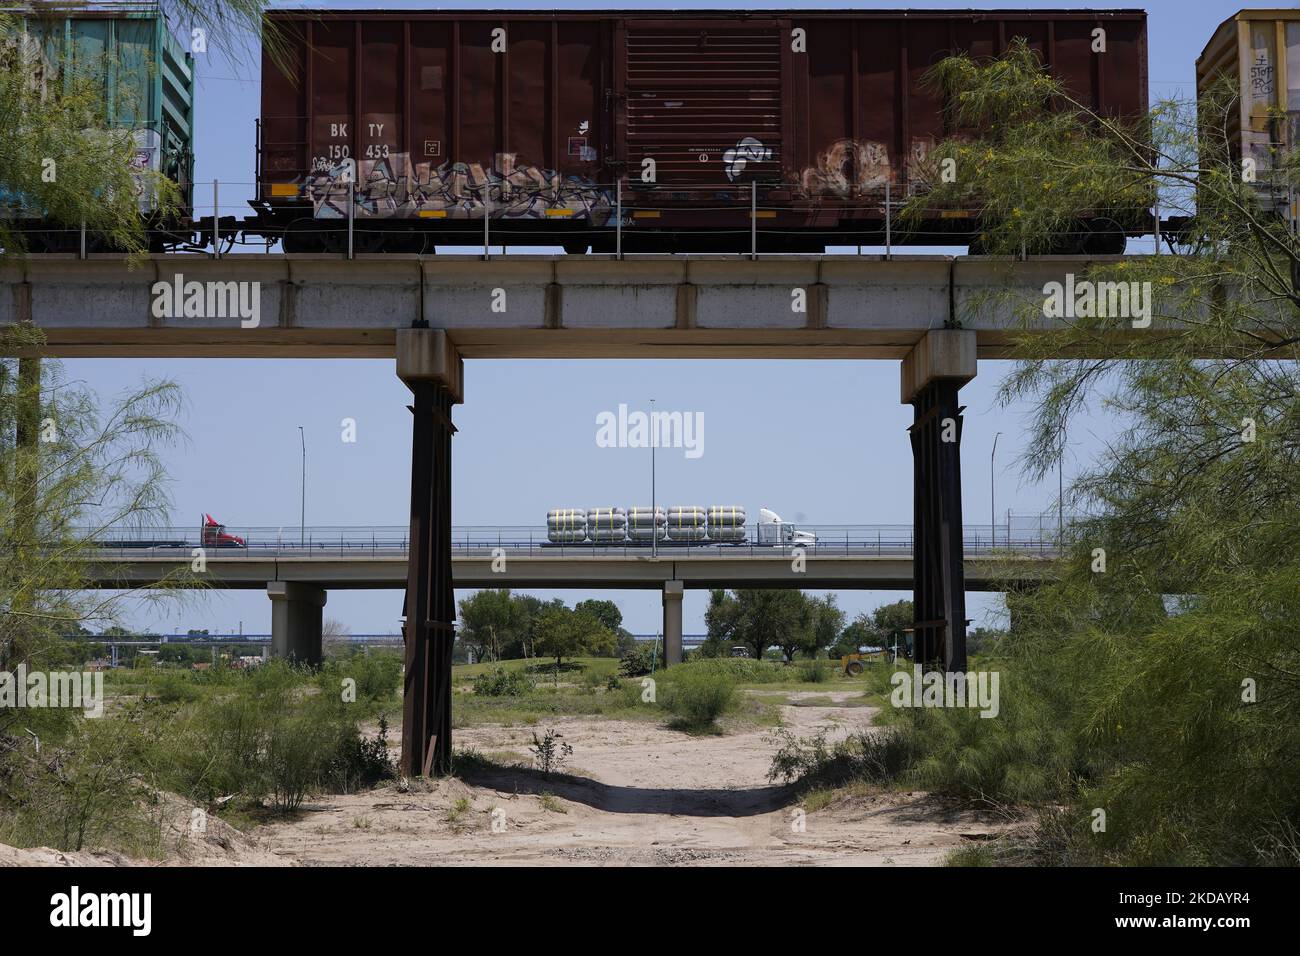 A train and a Truck cross into US from Mexico on May 26 2022 in Eagle Pass Texas, USA. Title 42, the Trump era mandate which was set to prevent migrants from entering the US, was to expire on May 23 but was blocked by a lawsuit filed by several states citing that the move to strike down the law “failed to meet standards set by the Administrative Procedure Act” and that there is no permanent solution to handling the inevitable surge in immigration. Opponents to upholding of the law voiced their demands stating that Title 42 is illegal in that it violates immigration laws that prevents immigrant Stock Photo